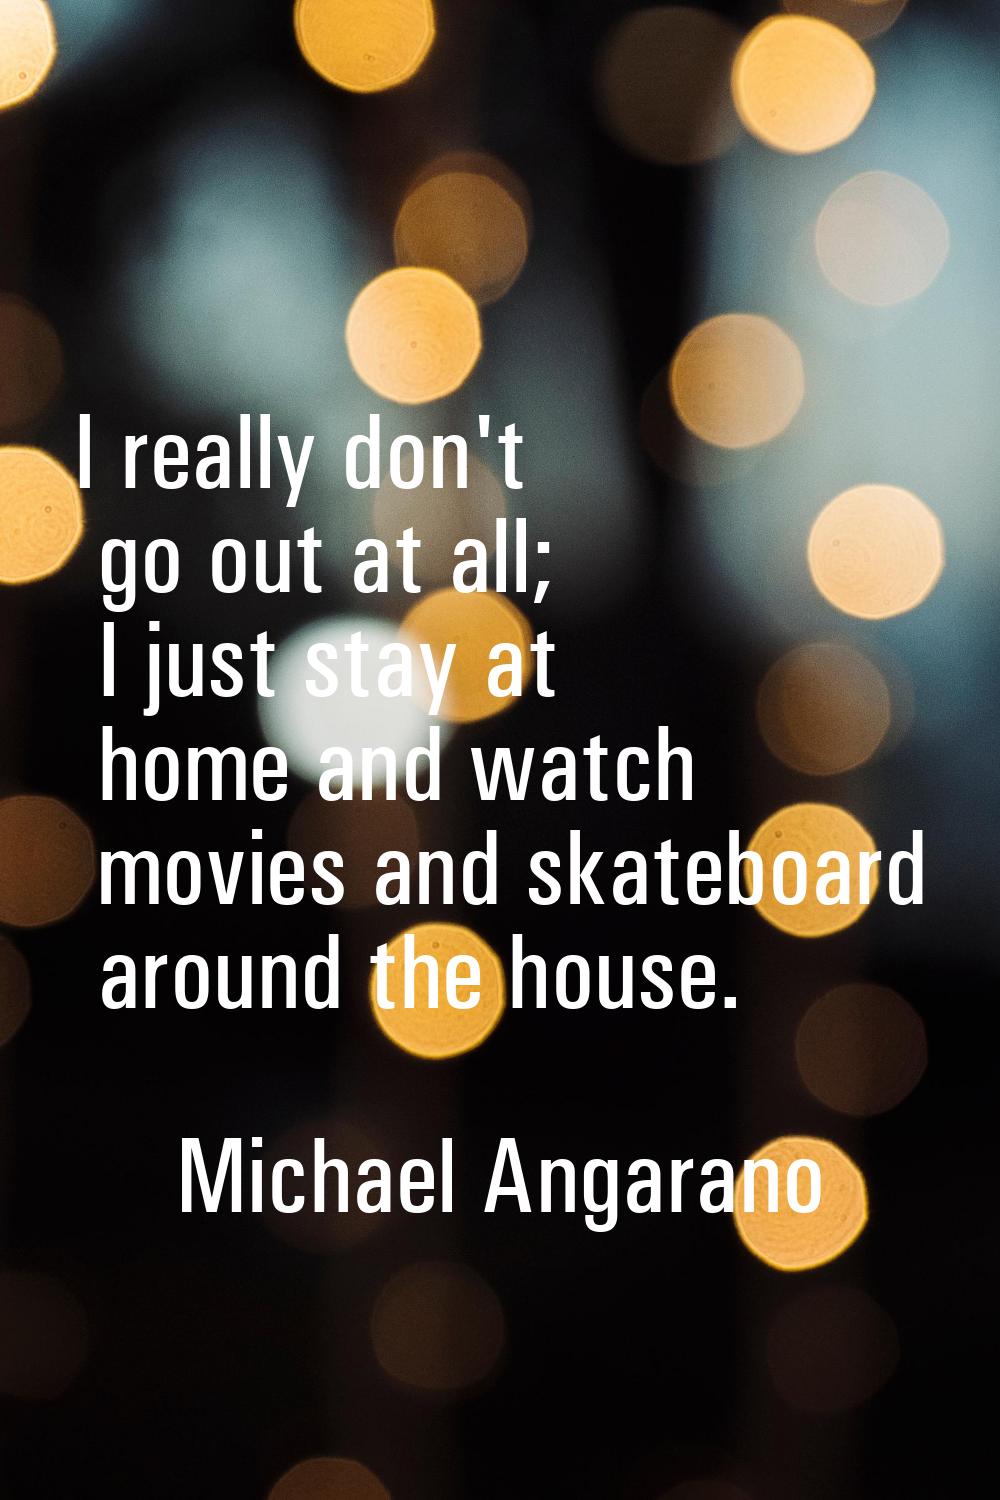 I really don't go out at all; I just stay at home and watch movies and skateboard around the house.